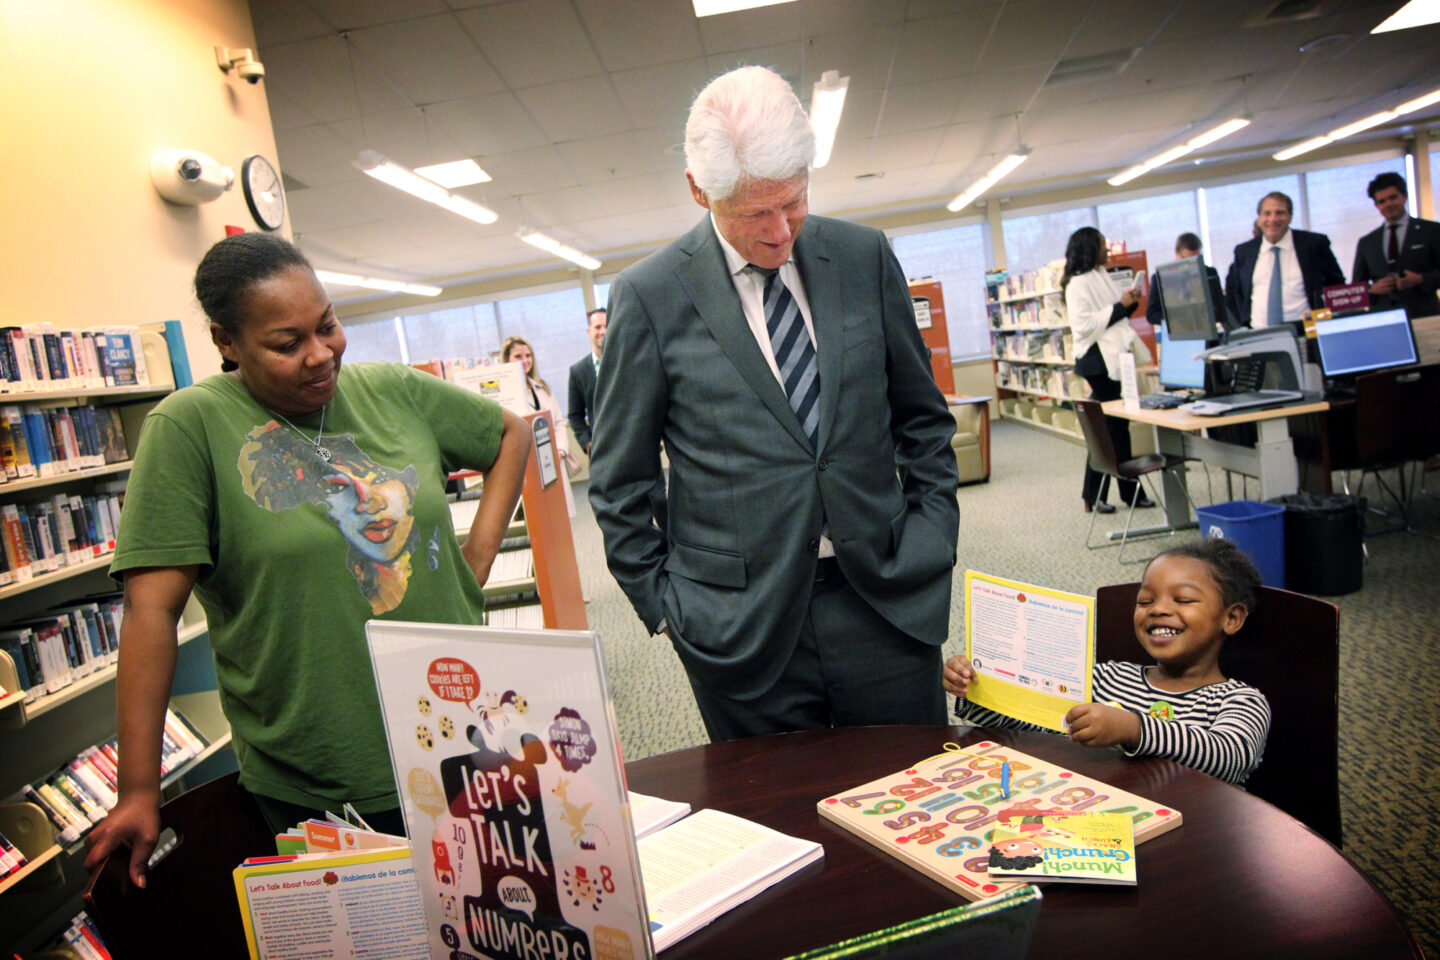 President Clinton speaks with an adult and child in a library. The child holds a children's book.